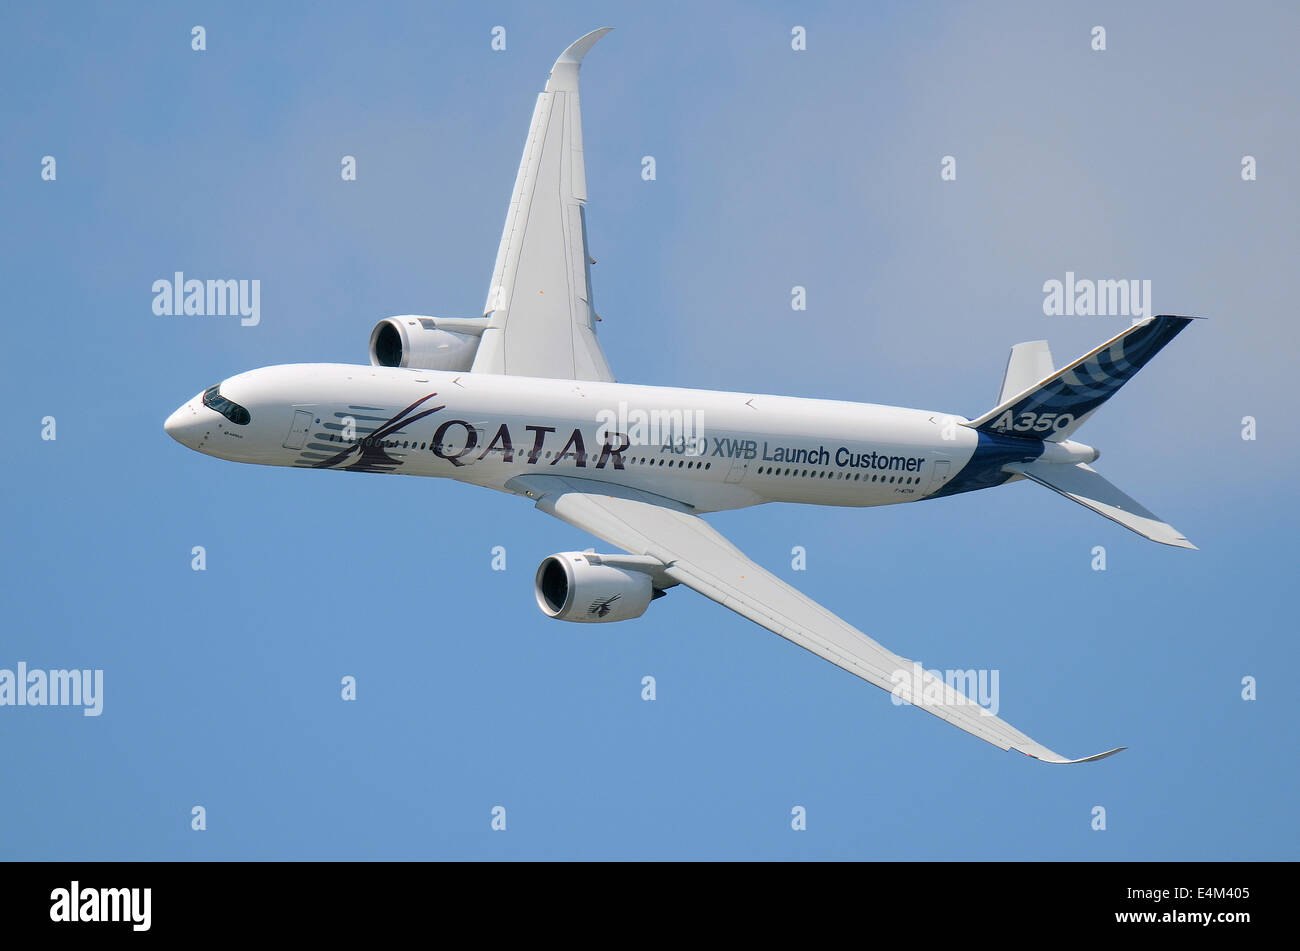 Airbus A350 jet airliner plane making the brand new type's public debut at Farnborough, in Qatar livery. Modern economic design Stock Photo